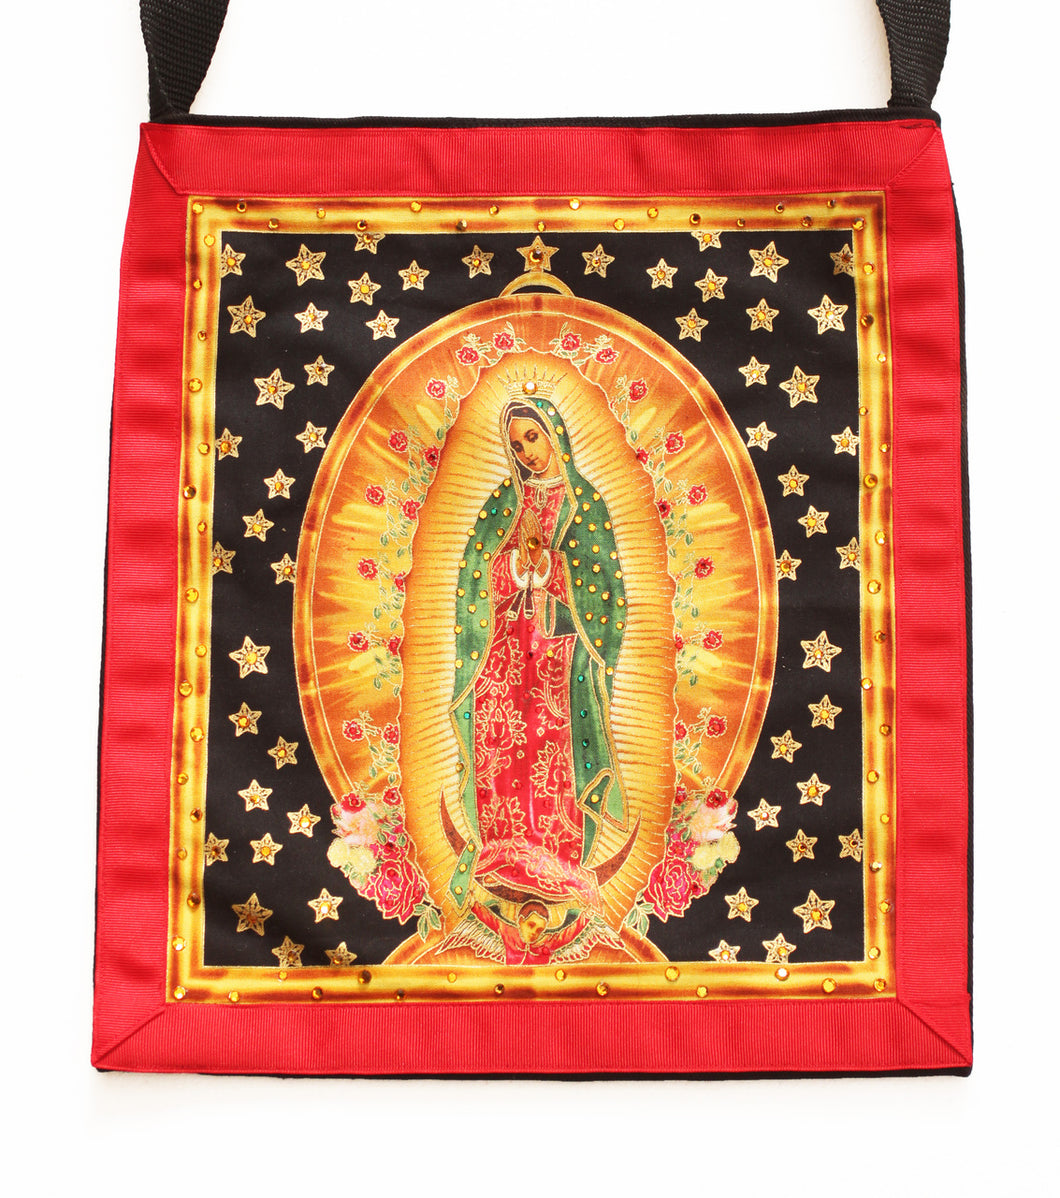 Our Lady The Virgin of Guadalupe with Stars Cotton Black Denim Tote - Hand-Embellished with Crystals